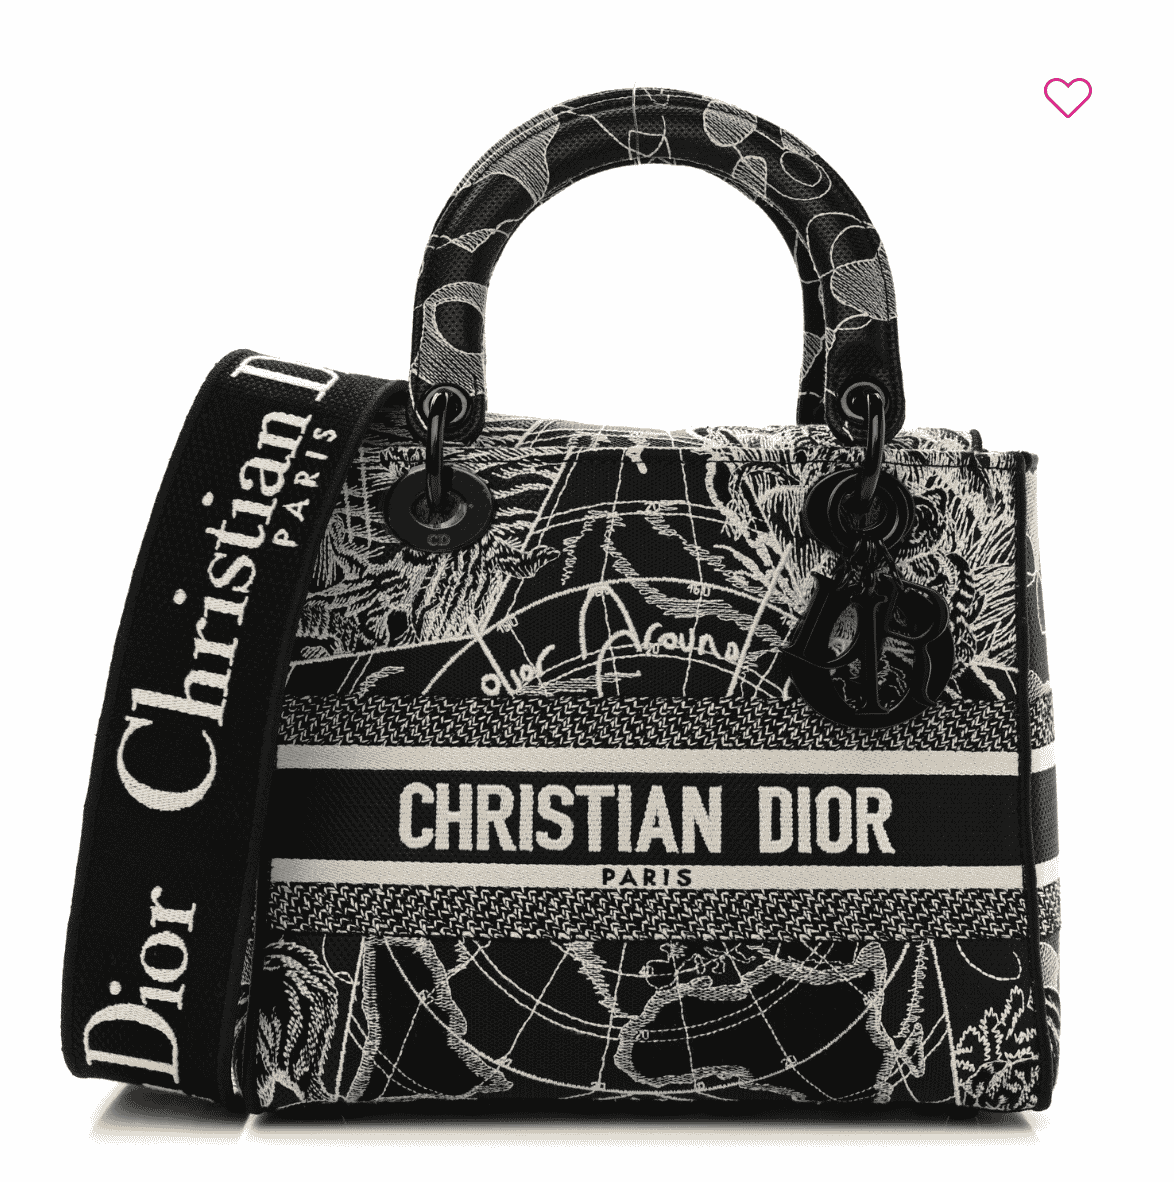 Lady Dior bag is one of the most expensive bags in the world Heres why